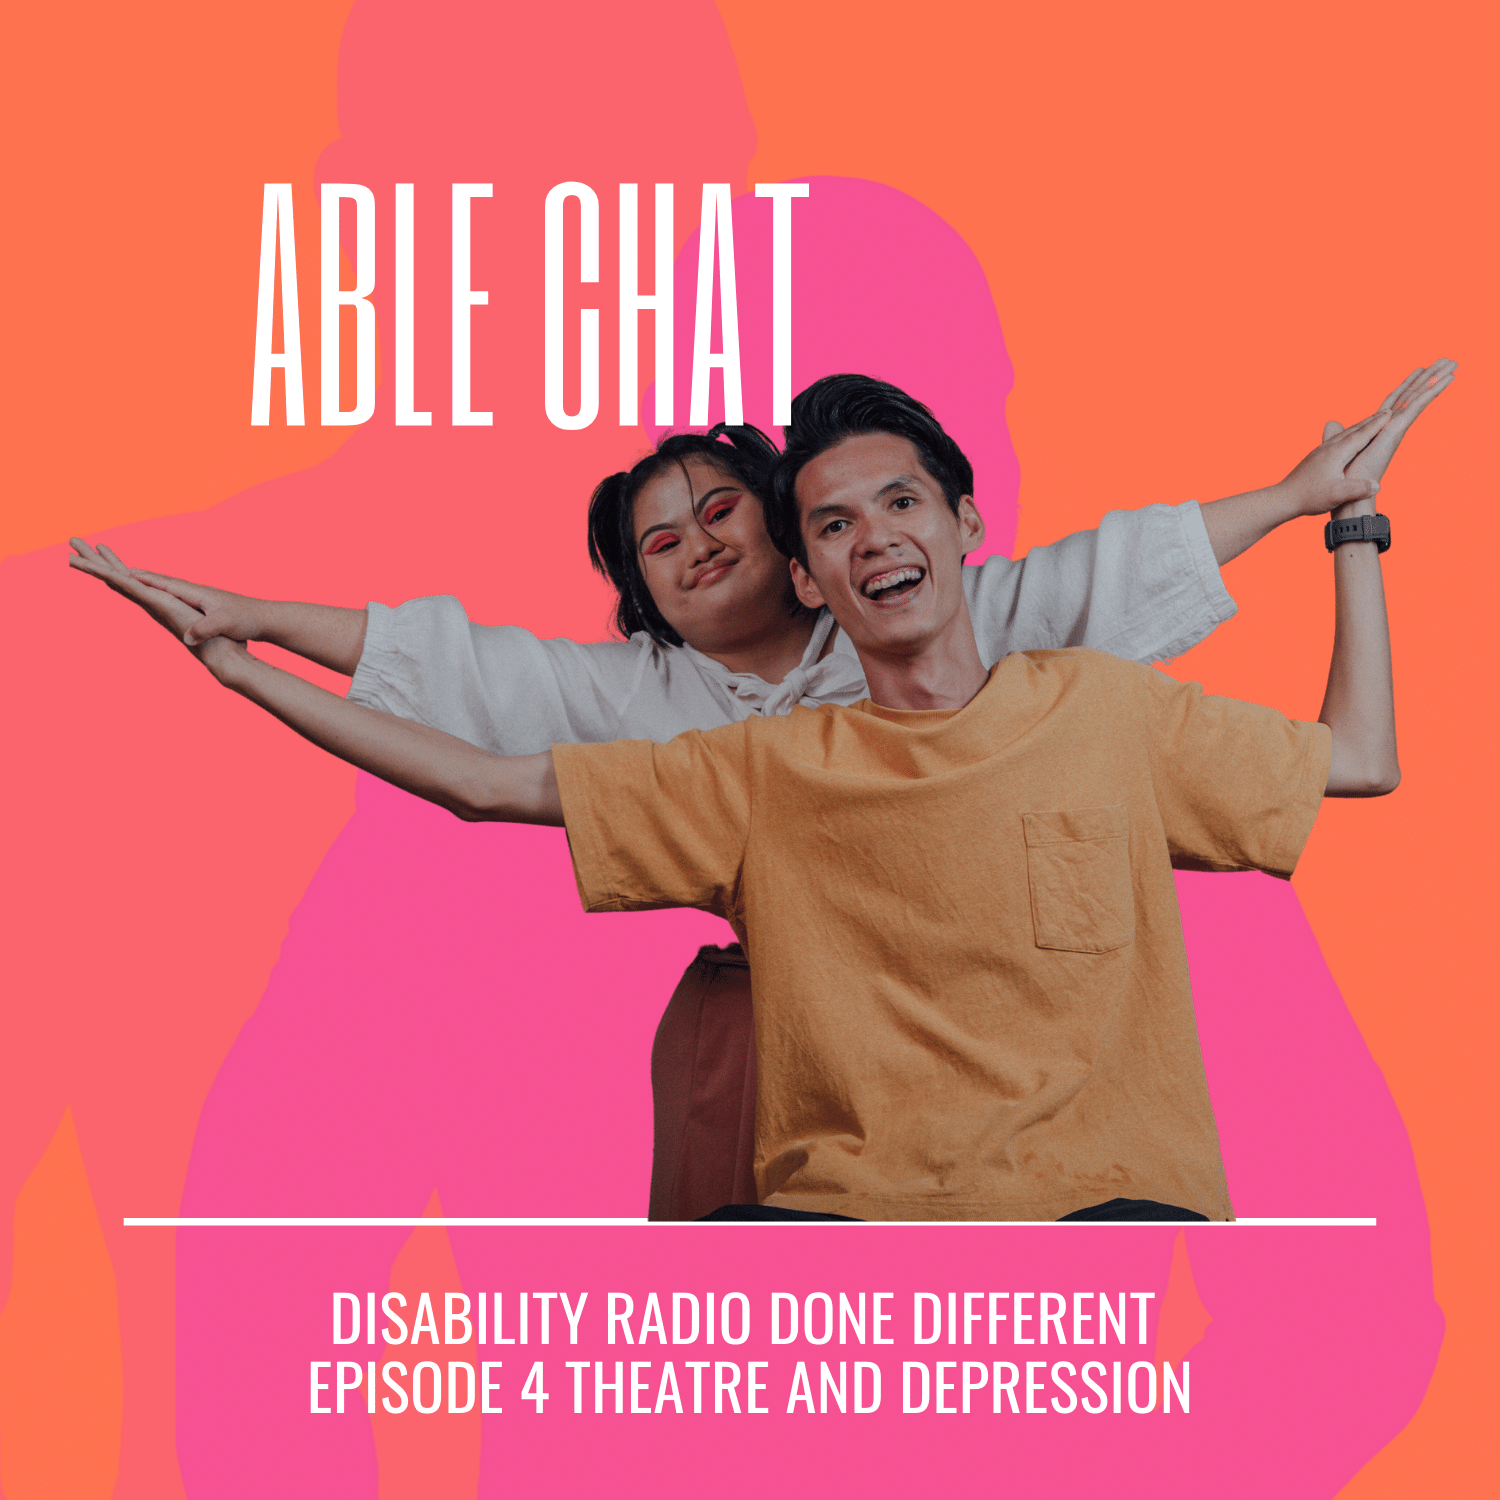 ablechat episode 4 - depression and theatre